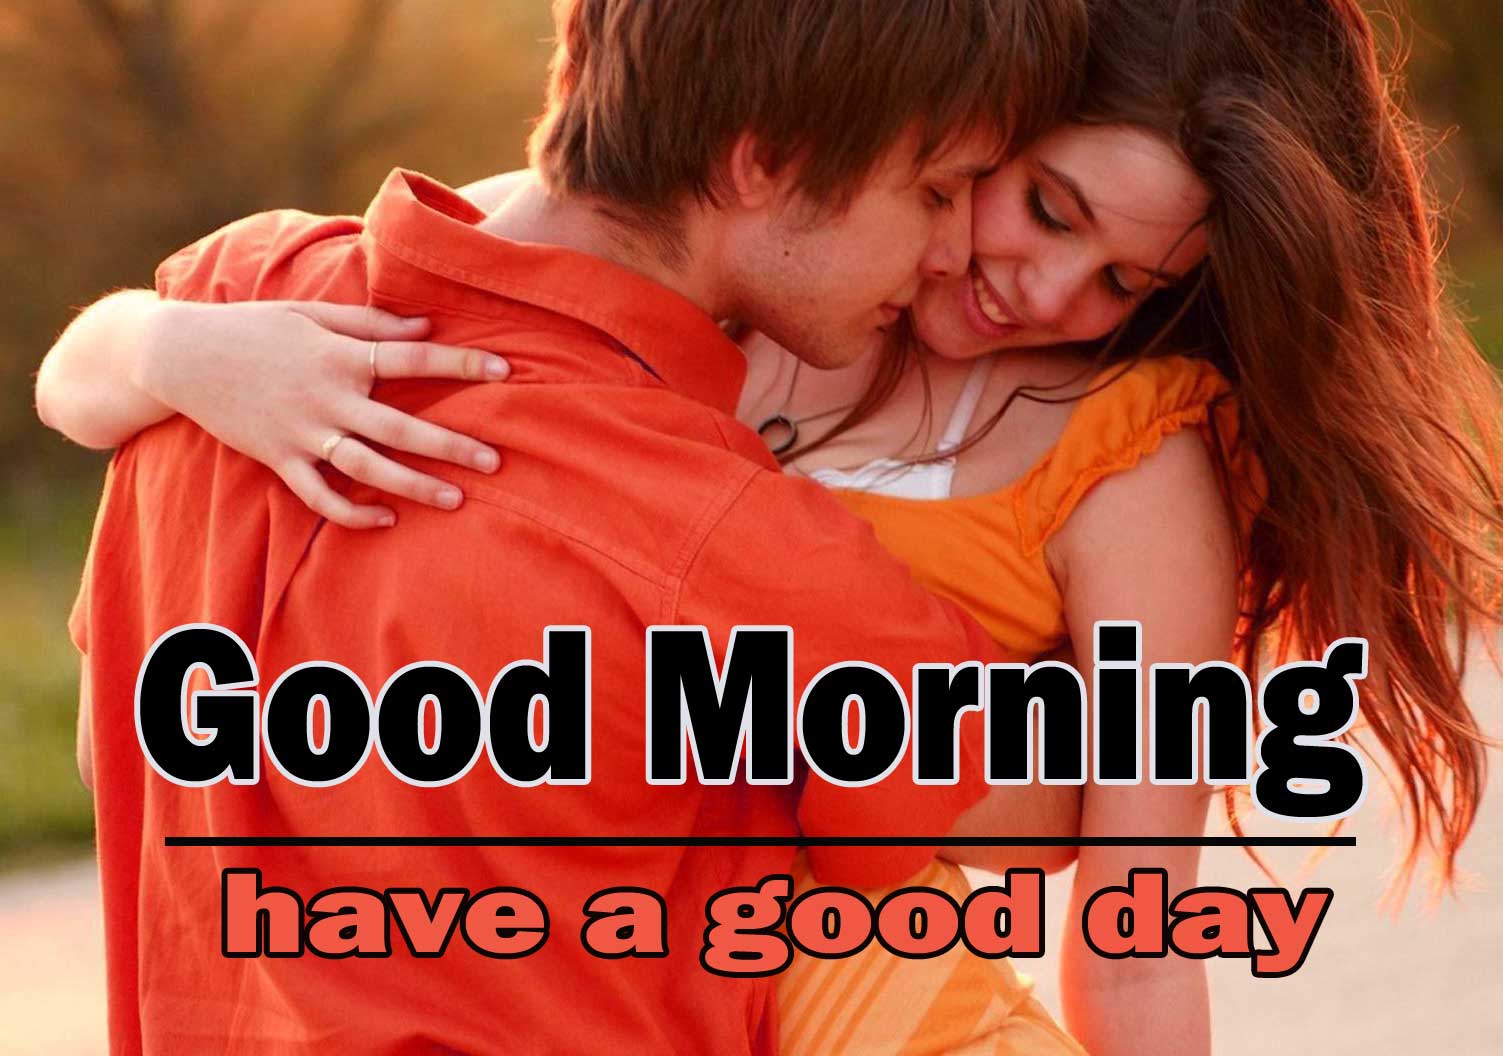 New Top Beautiful Romantic Love Couple Good Morning Photo Download 